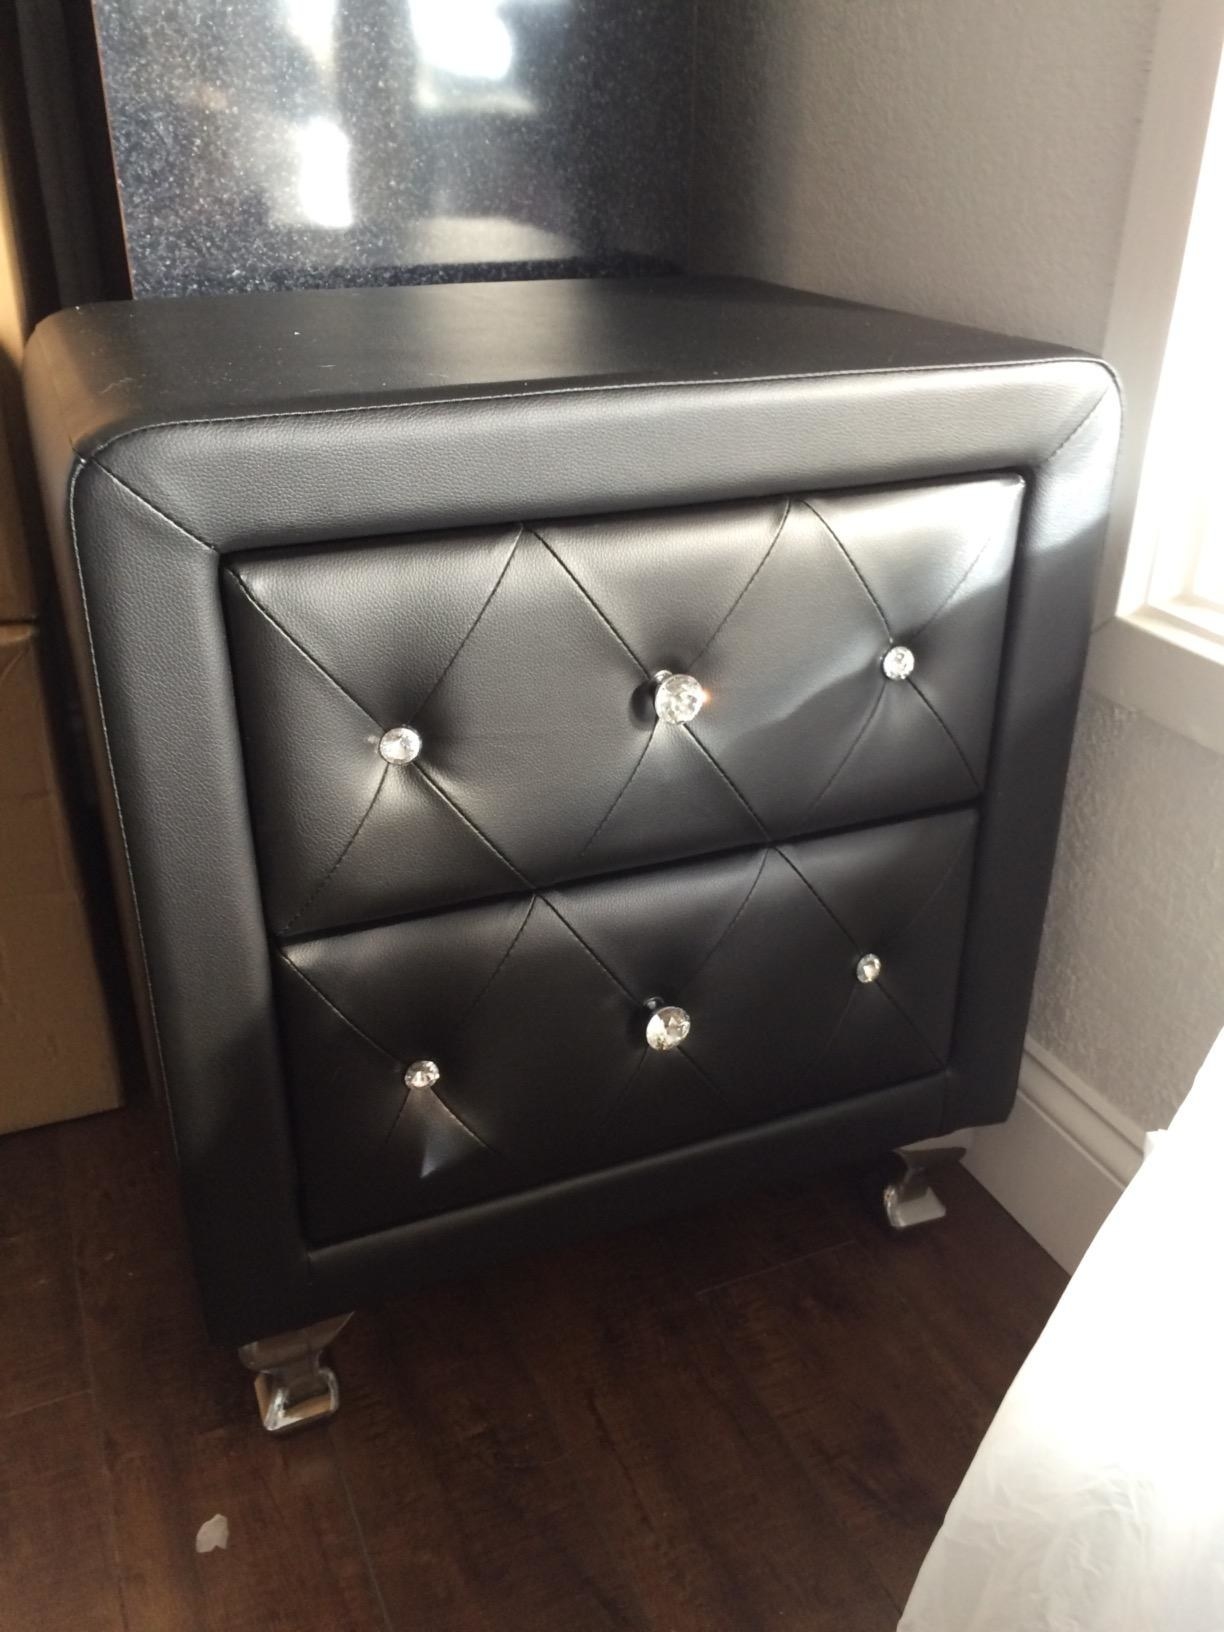 The nightstand in black